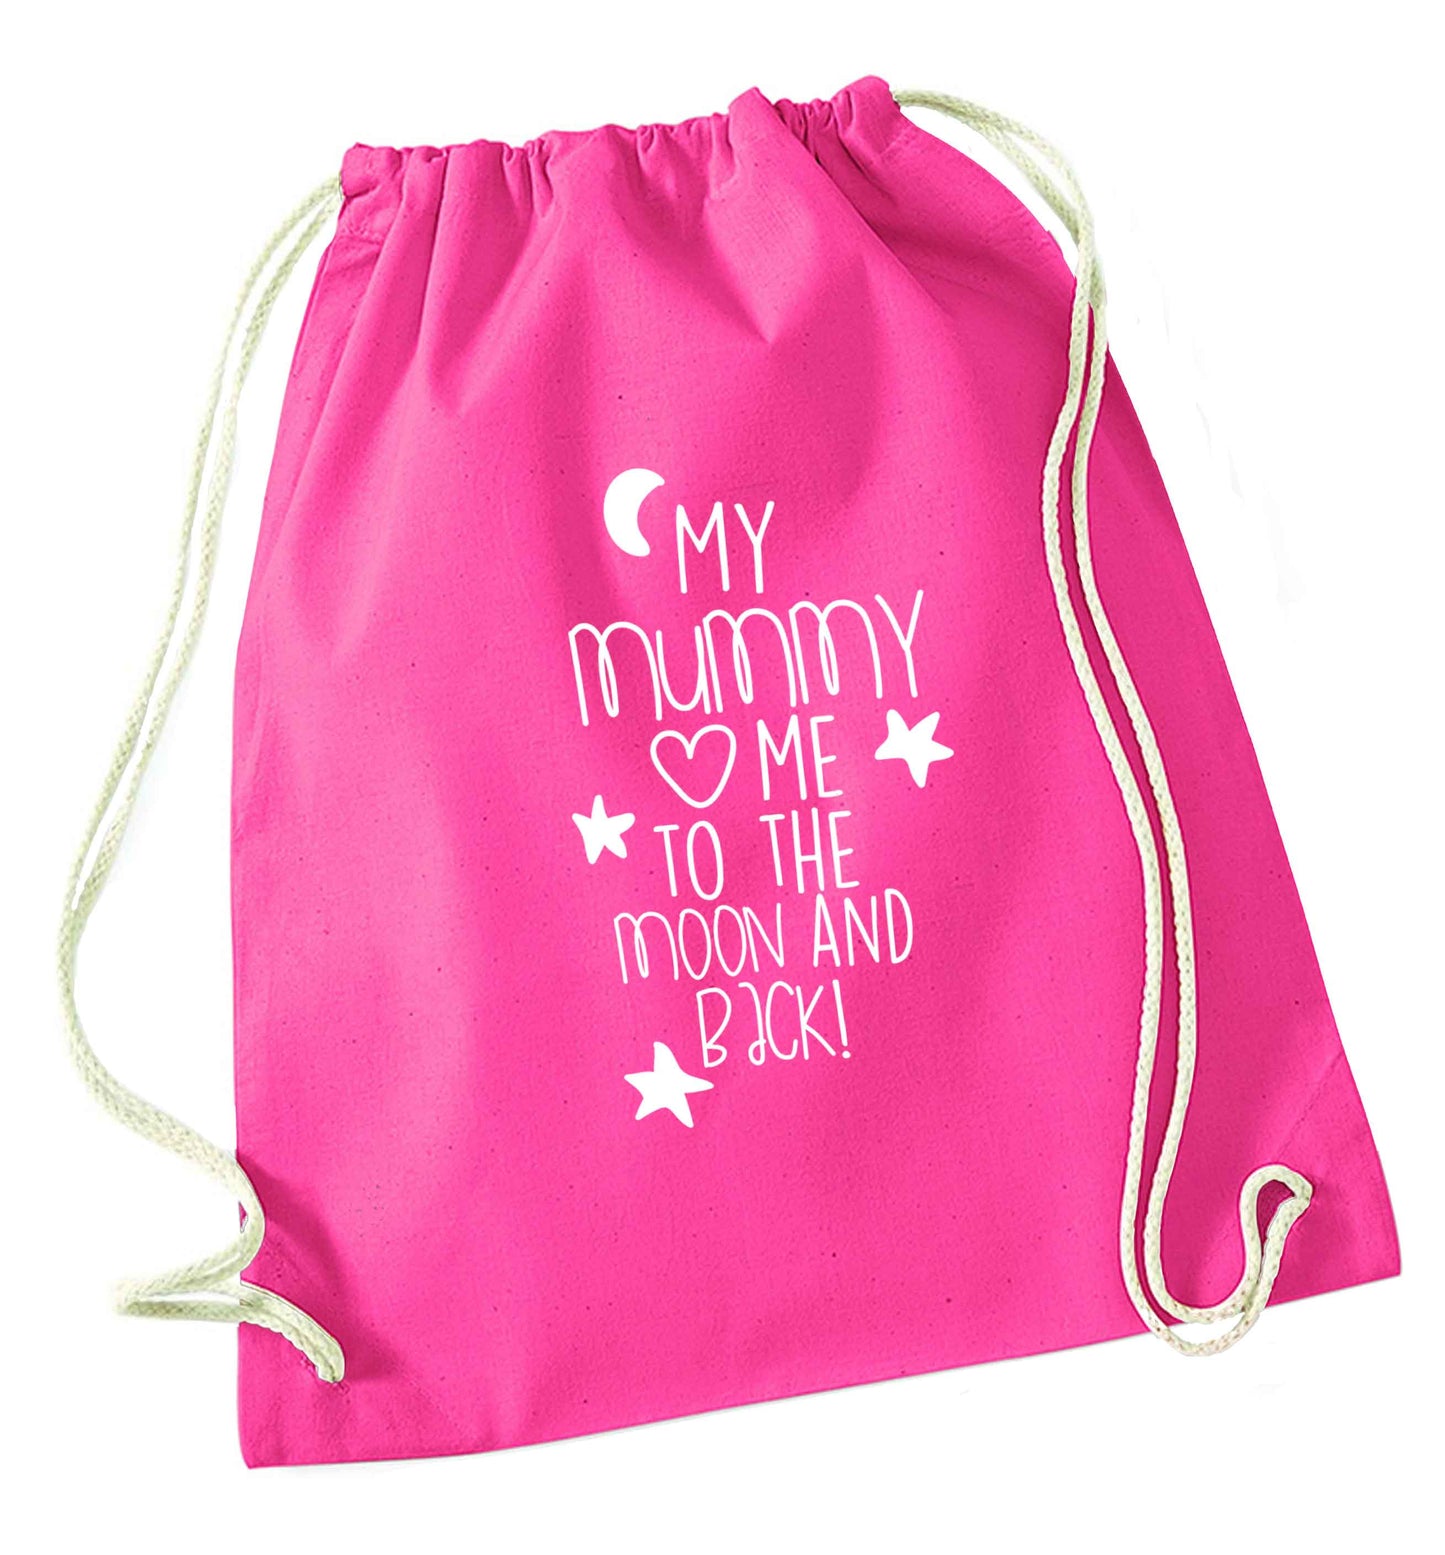 My mum loves me to the moon and back pink drawstring bag